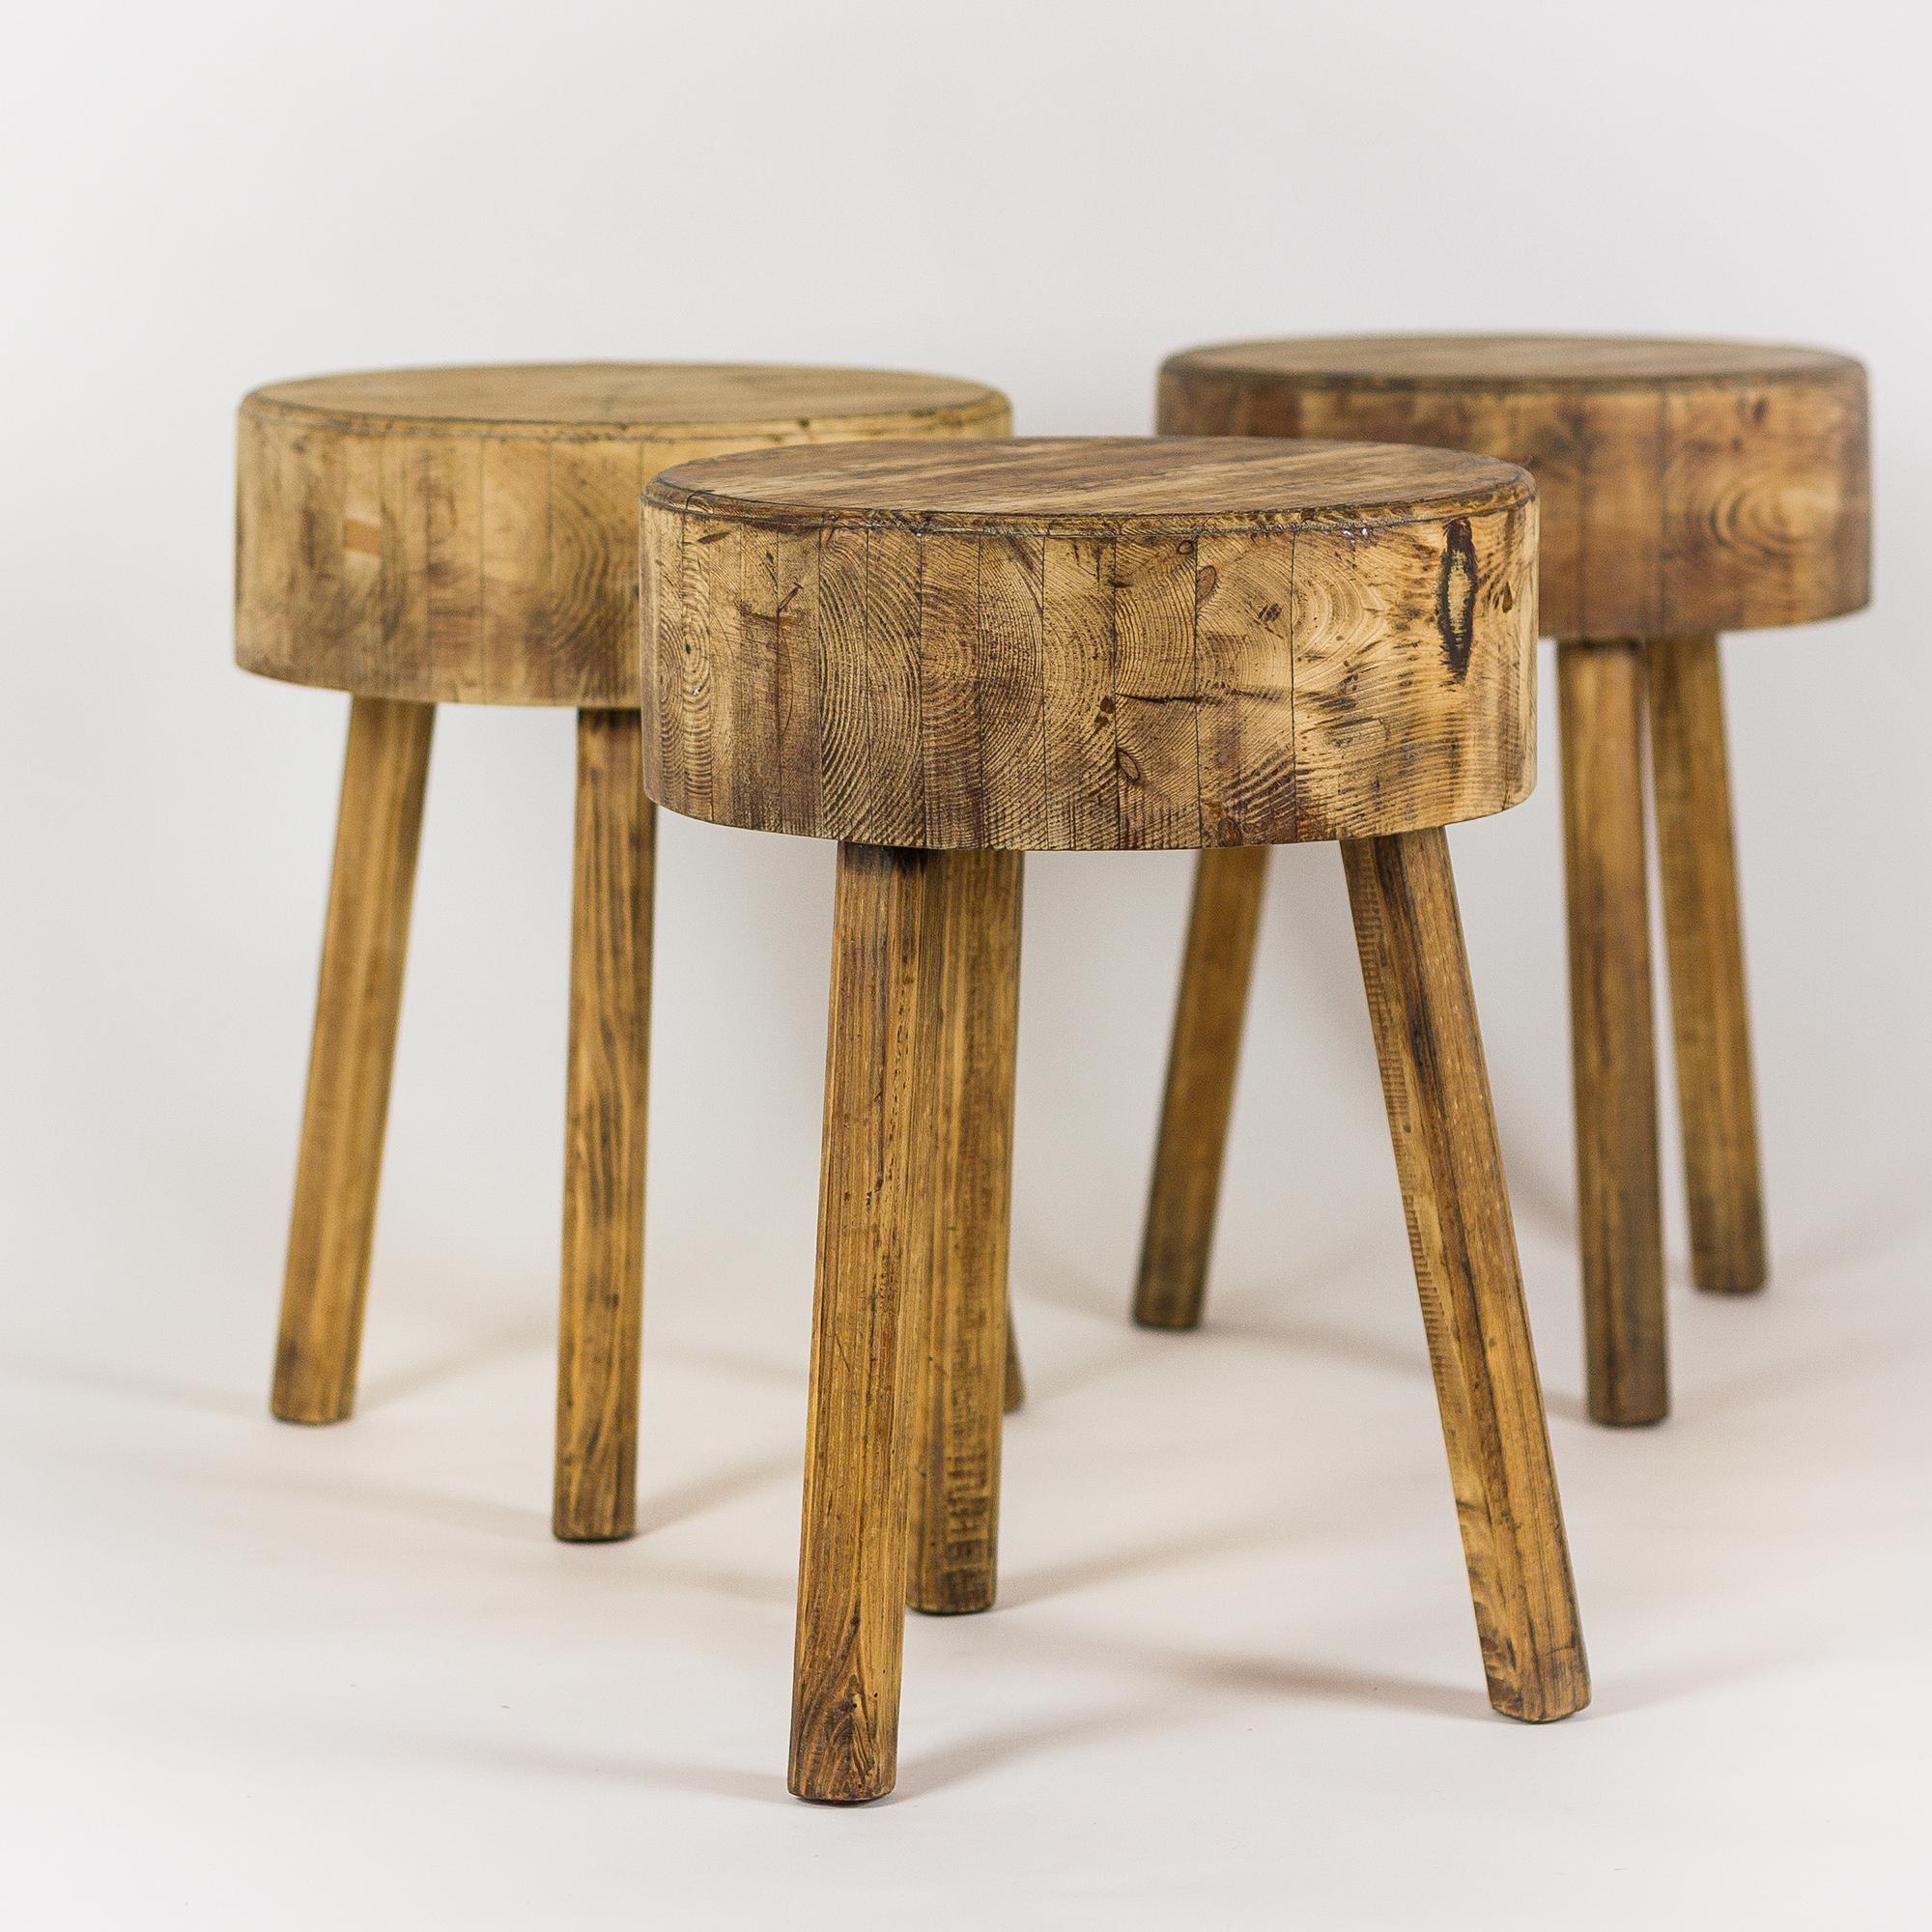 Hand-Crafted Vintage Estate Made Stools